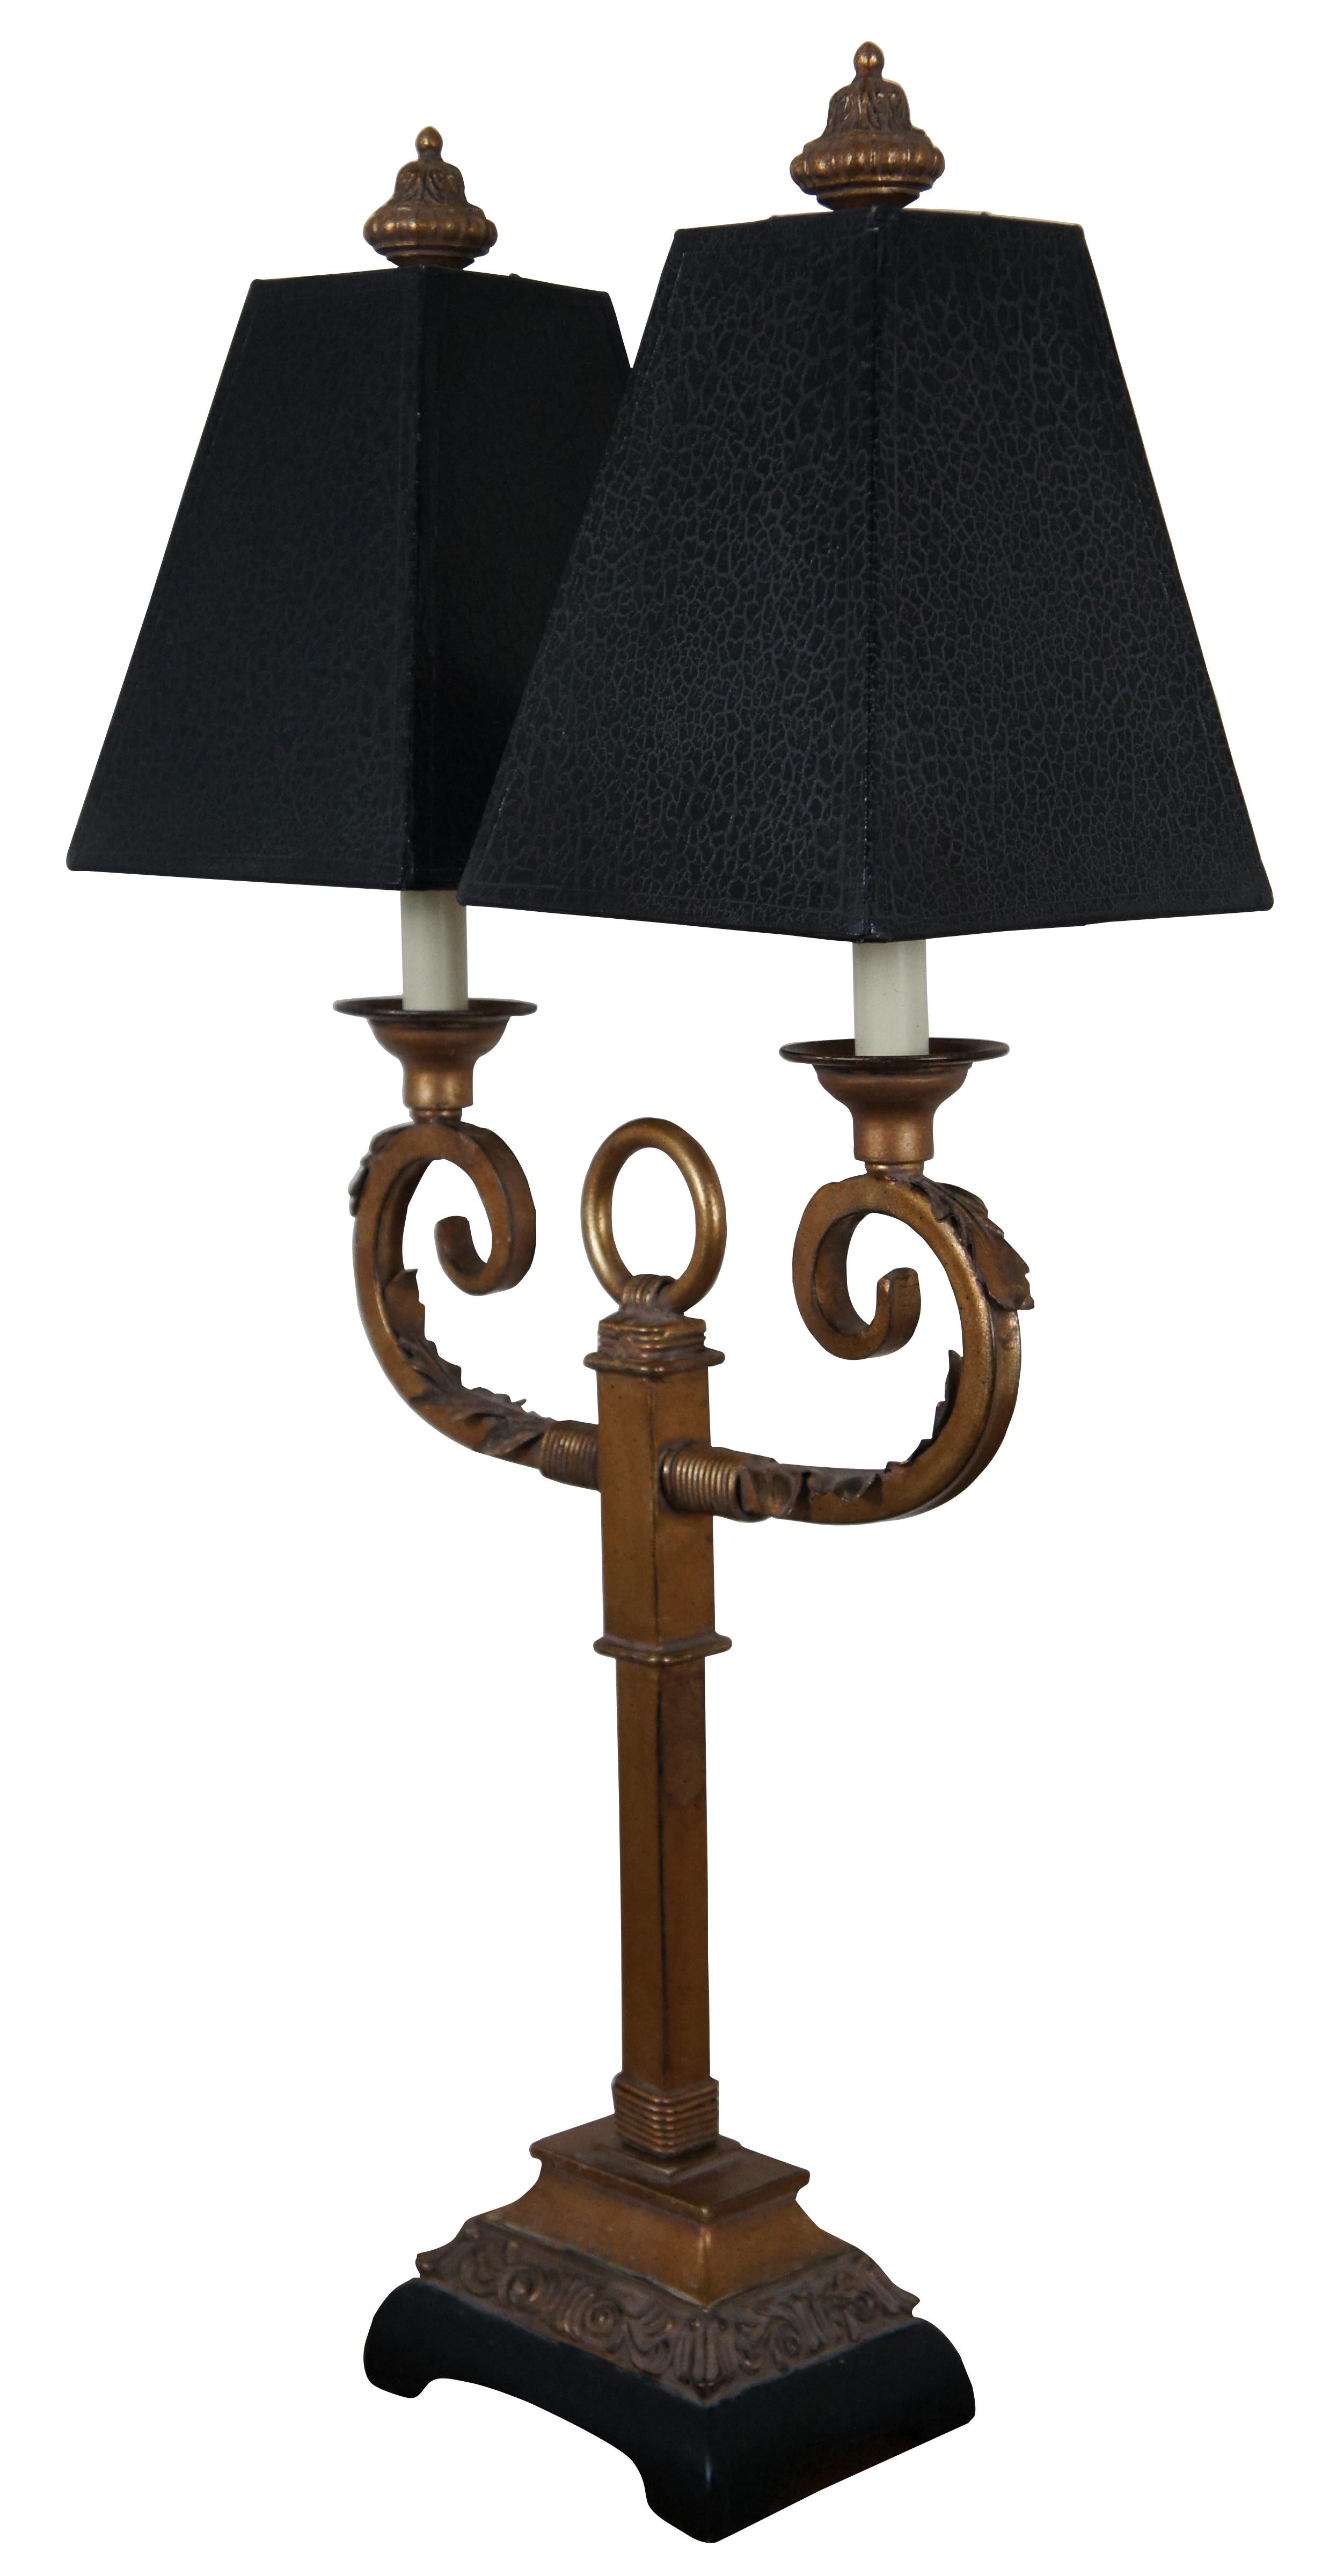 Vintage Uttermost black and gold French style candelabra table lamp with two candle or candlestick lights and double black crackle finish shades. Measure: 34